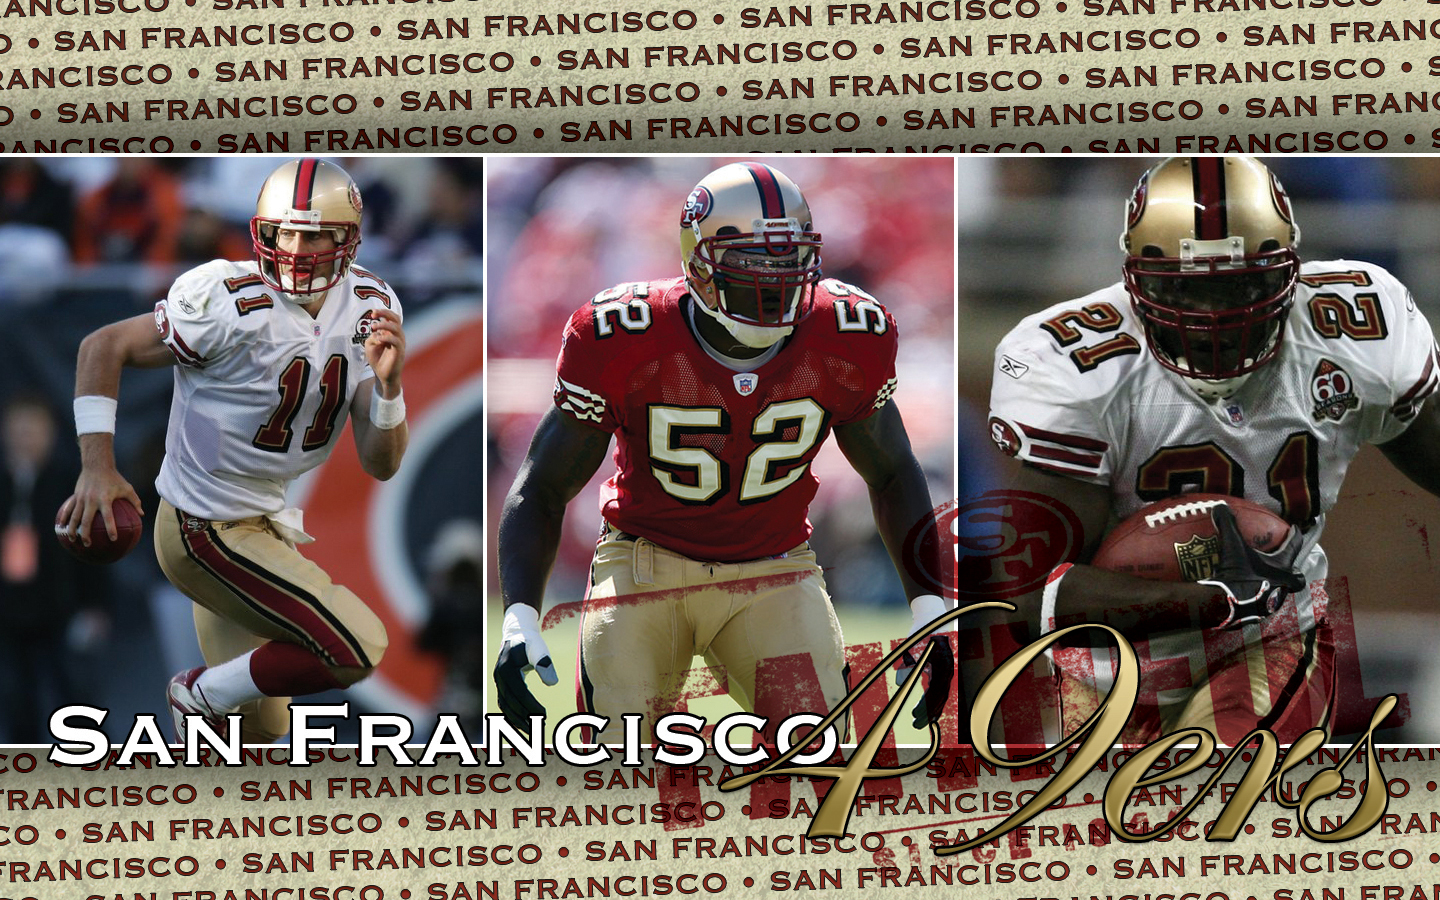  wallpaper other 2008 2015 grizzlee503 san francisco 49ers wallpaper